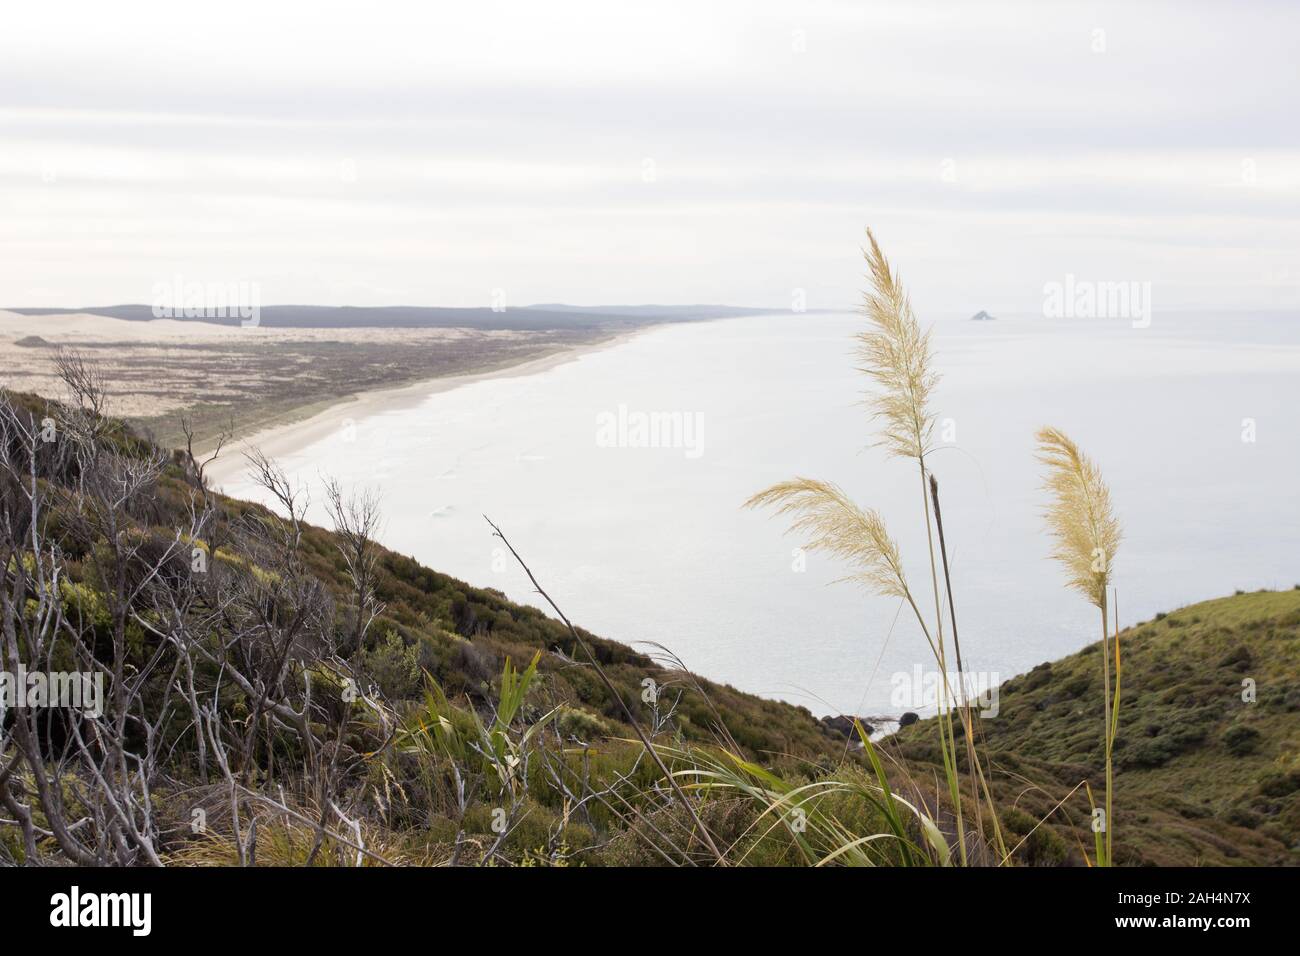 The northern end of Ninety Mile Beach in Northland, New Zealand, as seen from the mountains of the Te Paki Coastal Track. There is a flax flower and s Stock Photo